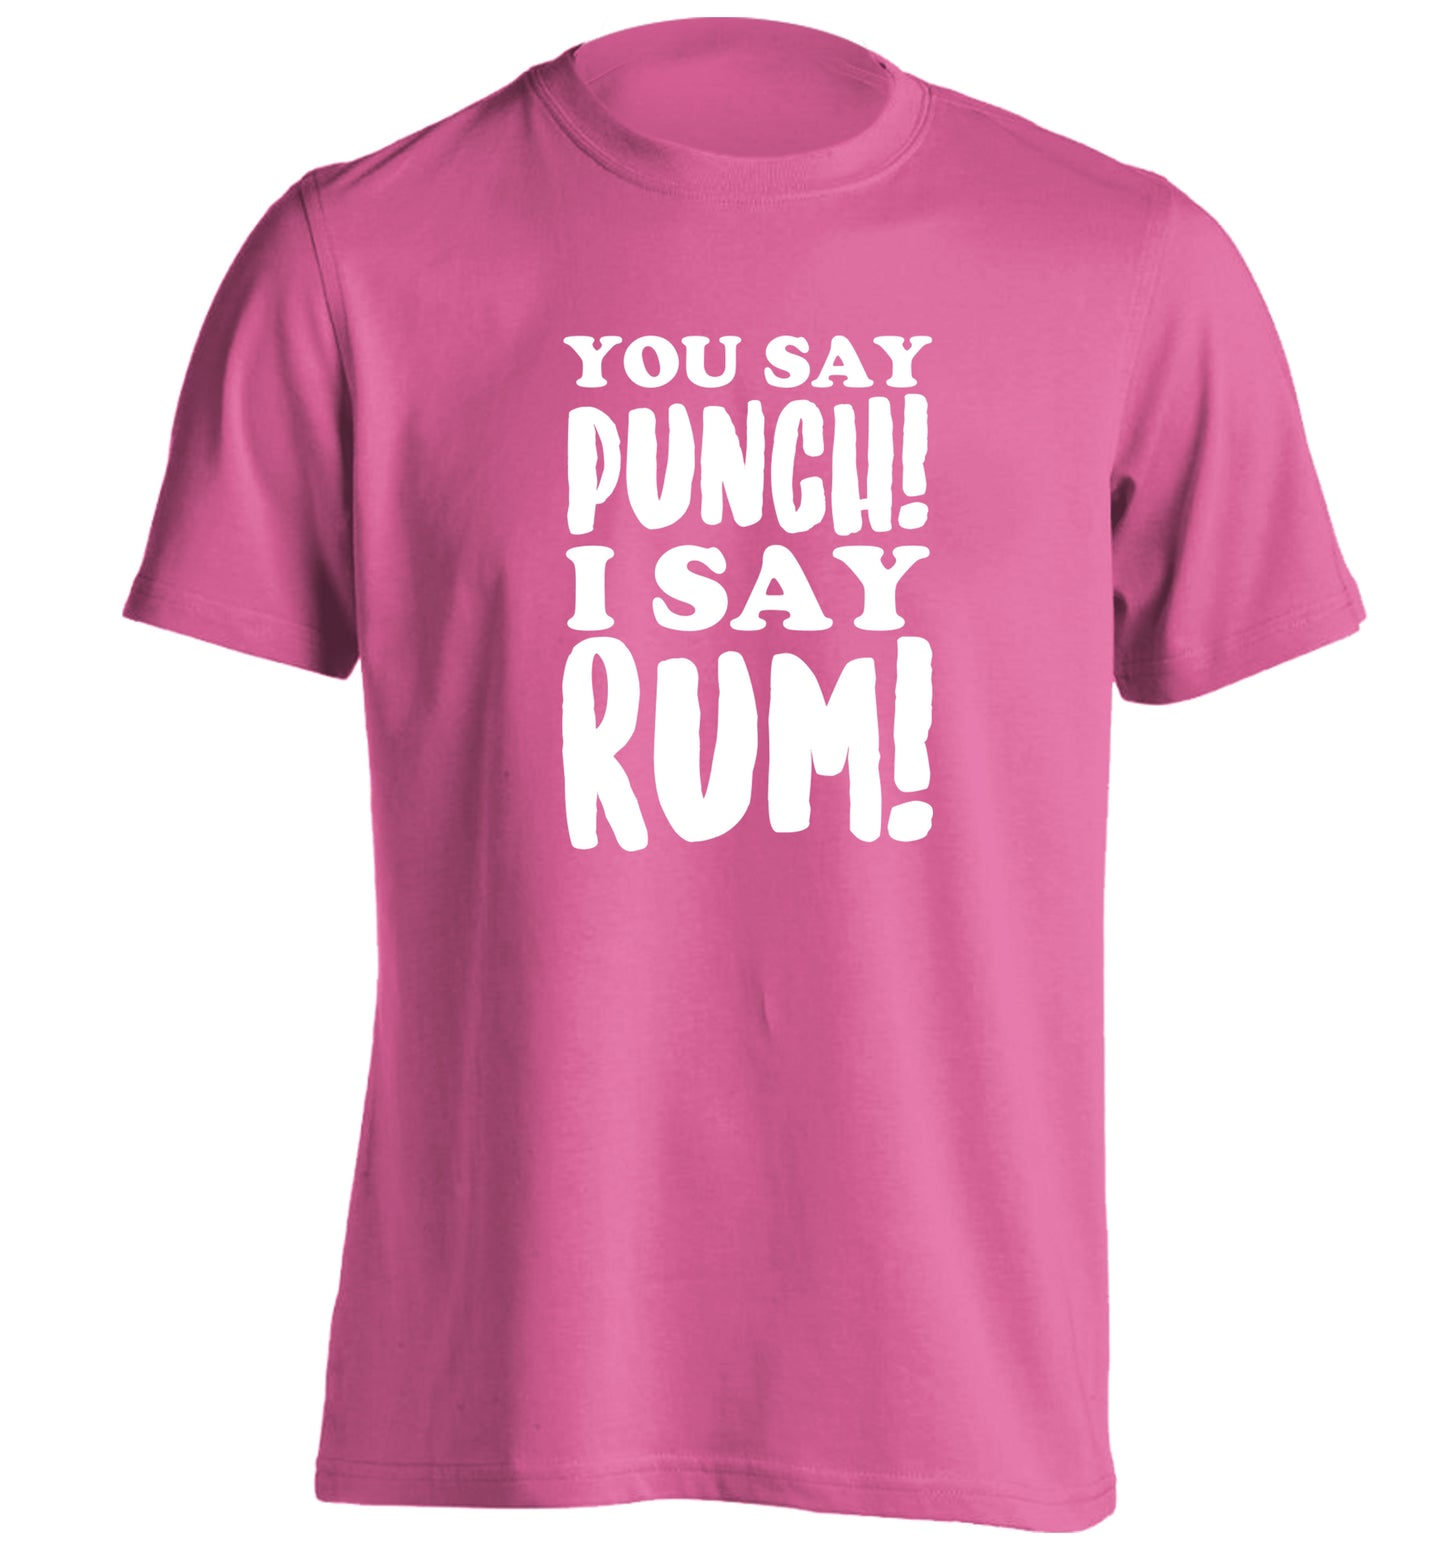 You say punch I say rum! adults unisex pink Tshirt 2XL